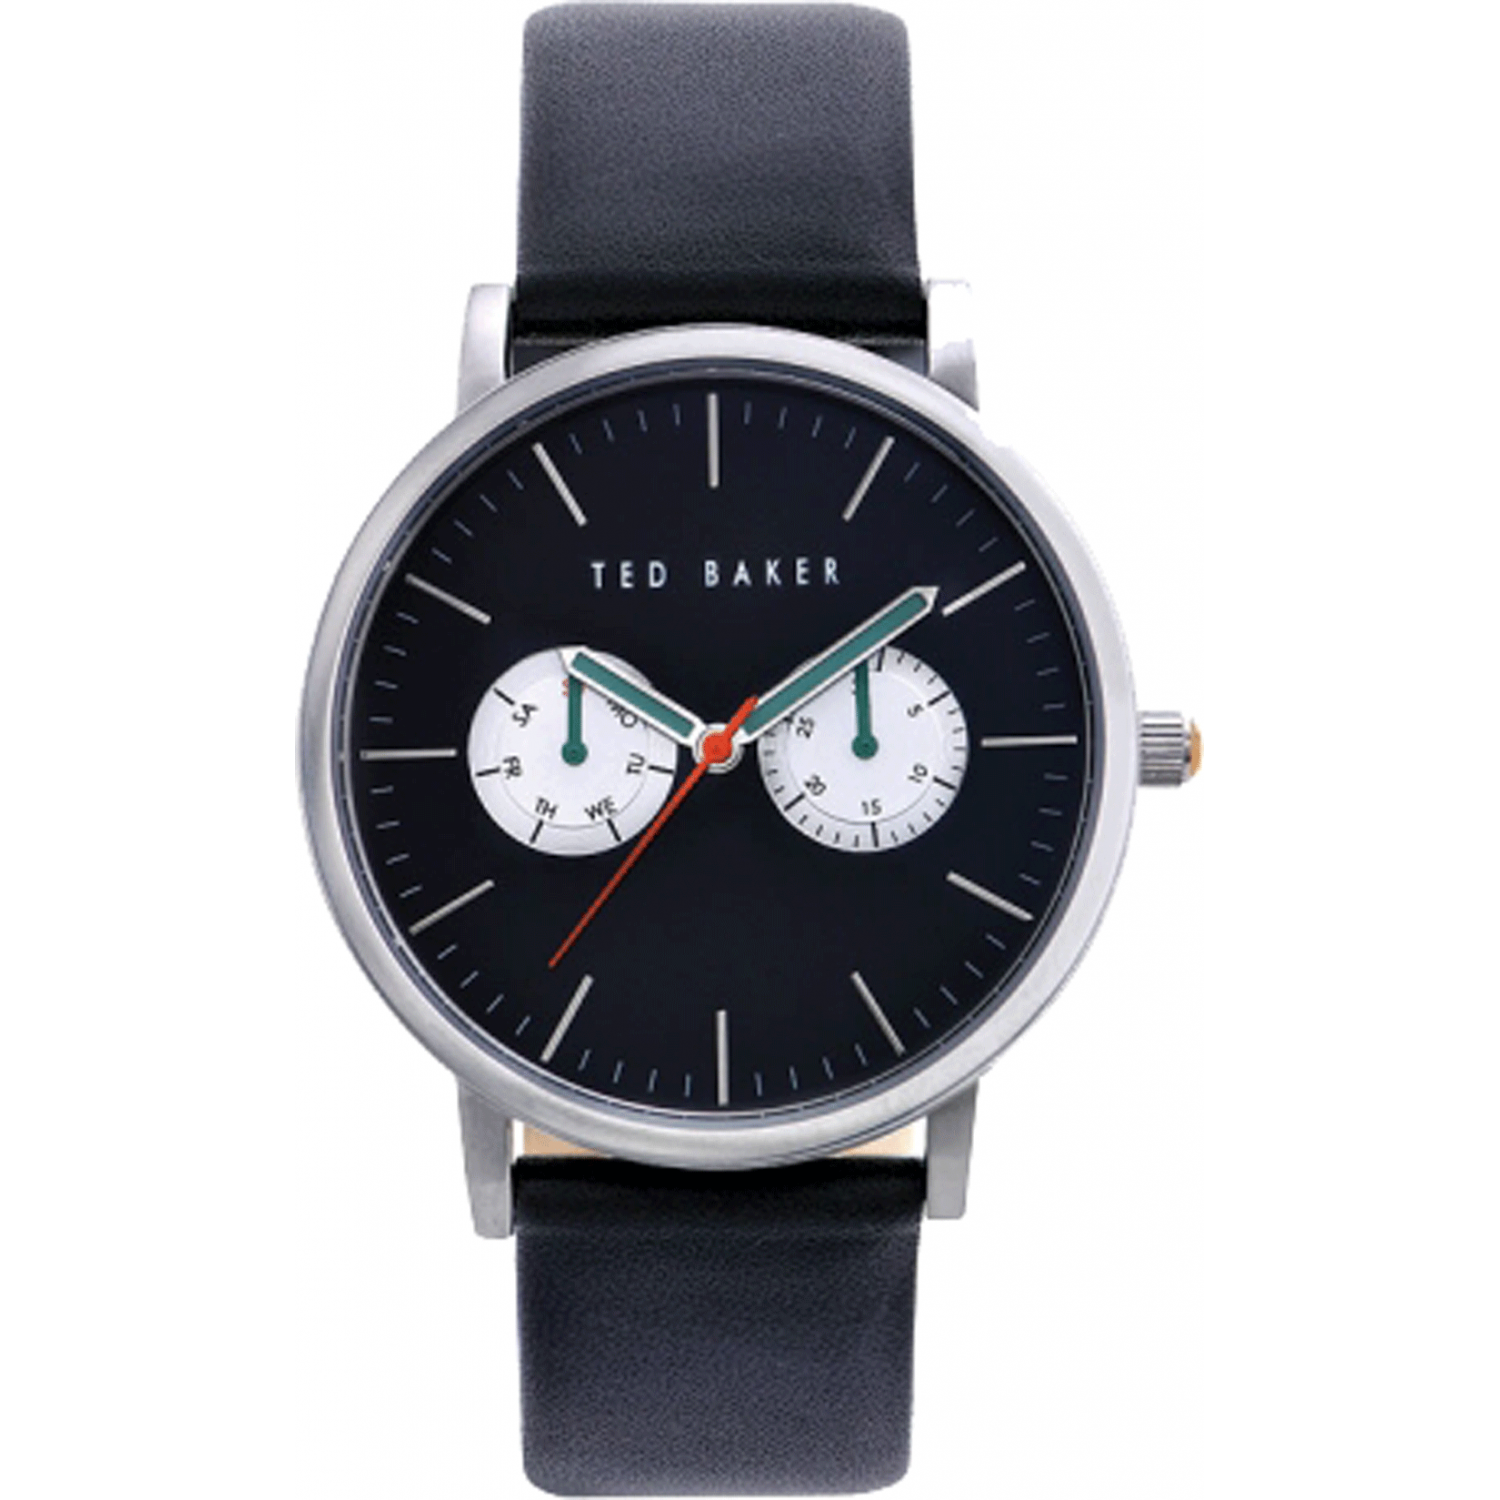 Ted Baker TE1097 Watch | Shade Station